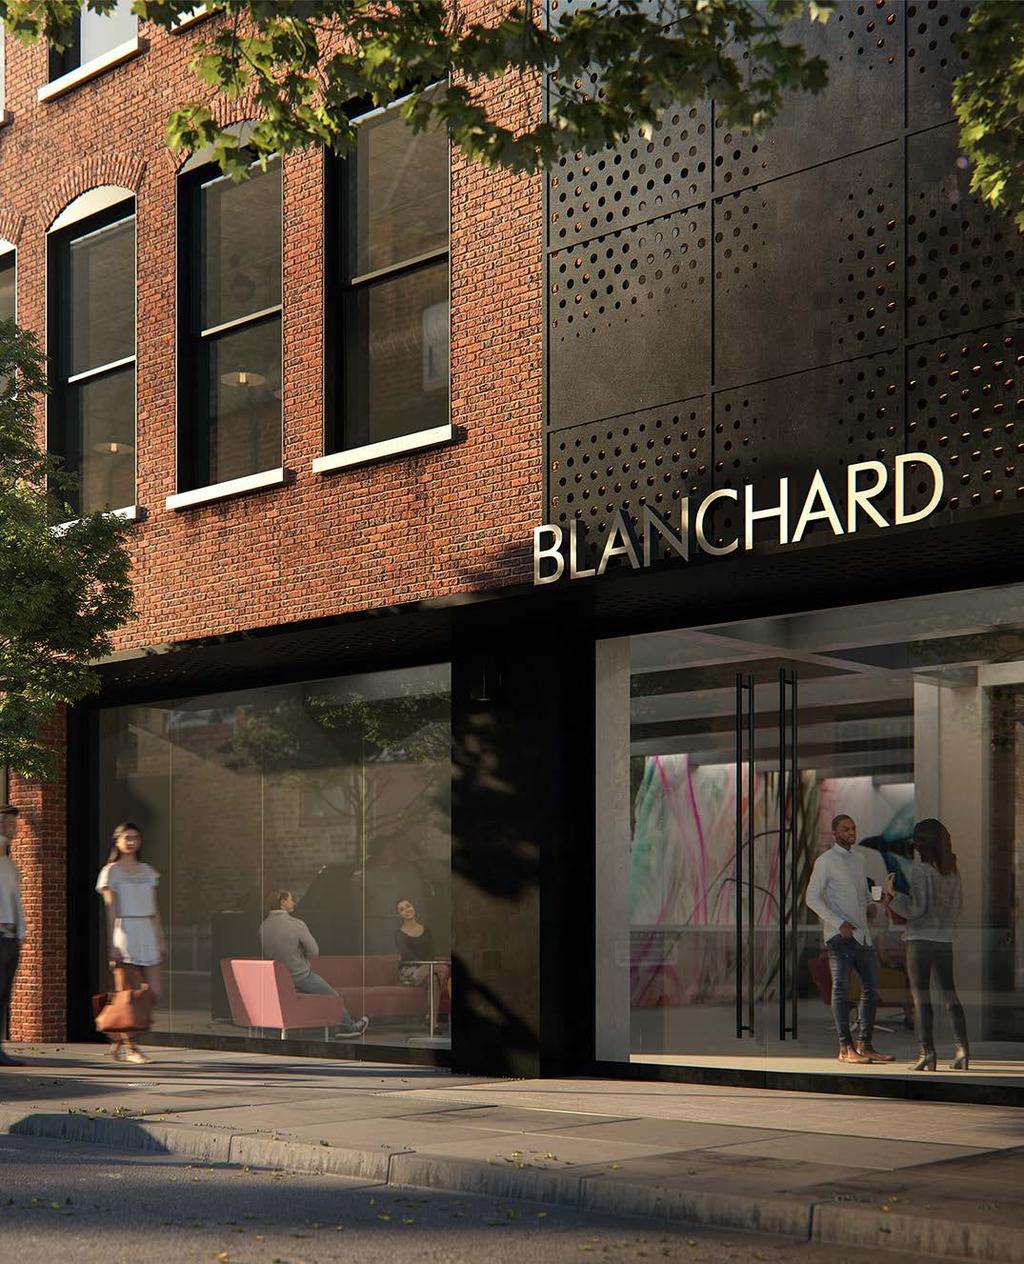 BLANCHARD BLANCHARD is a seven-story, 220,000 square foot, former warehouse building located in the heart of the Hunter s Point neighborhood of Long Island